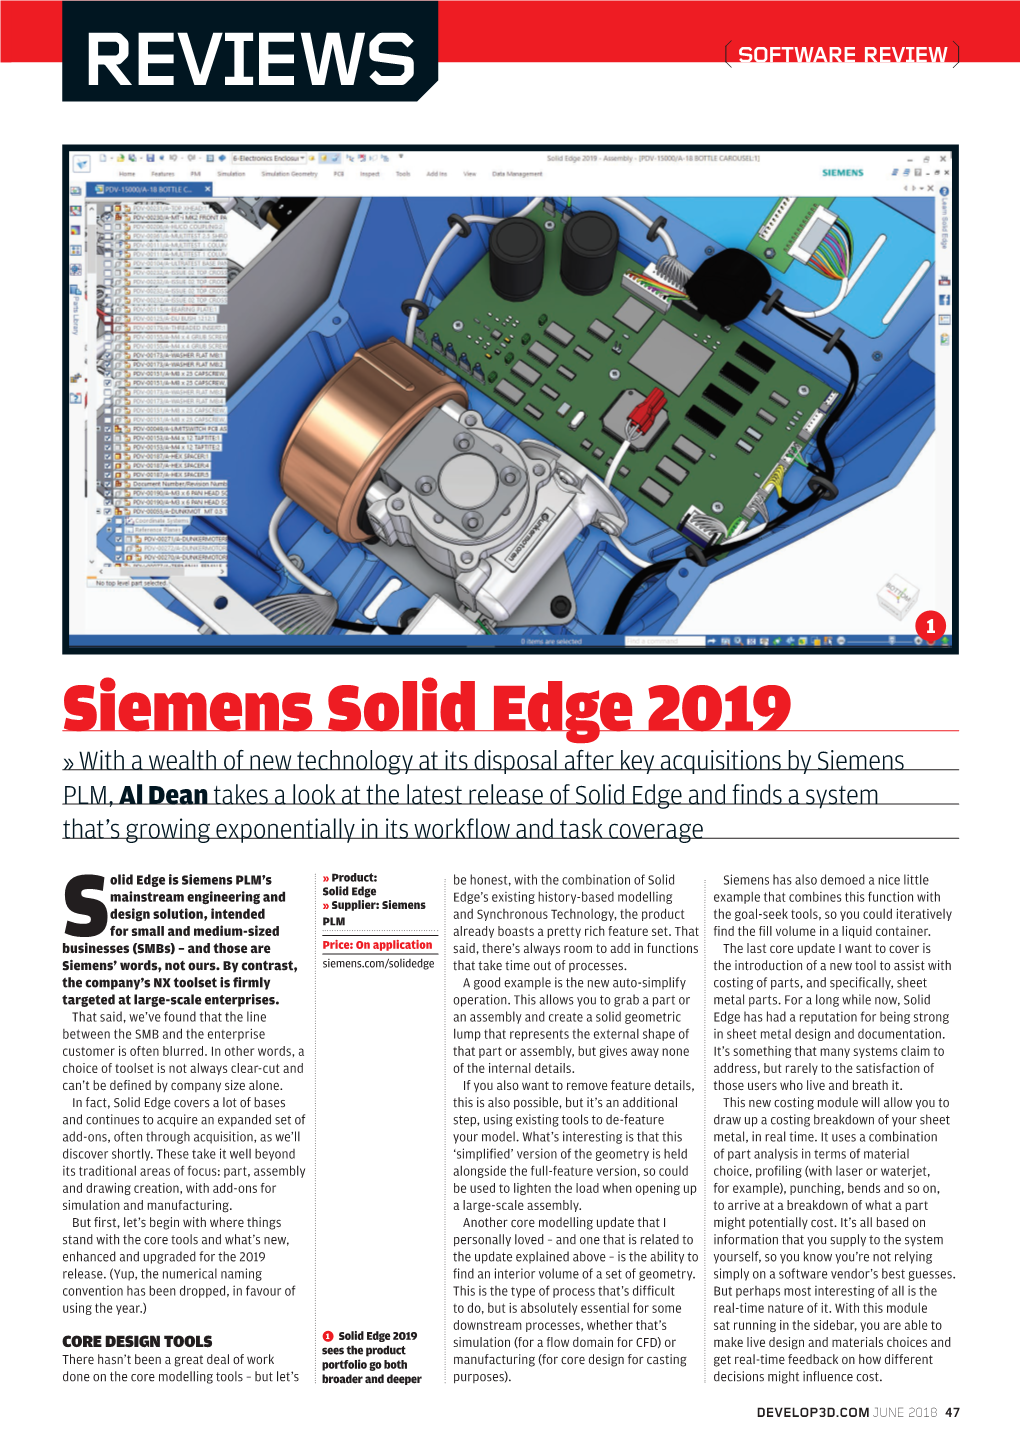 Read the Solid Edge 2019 Review